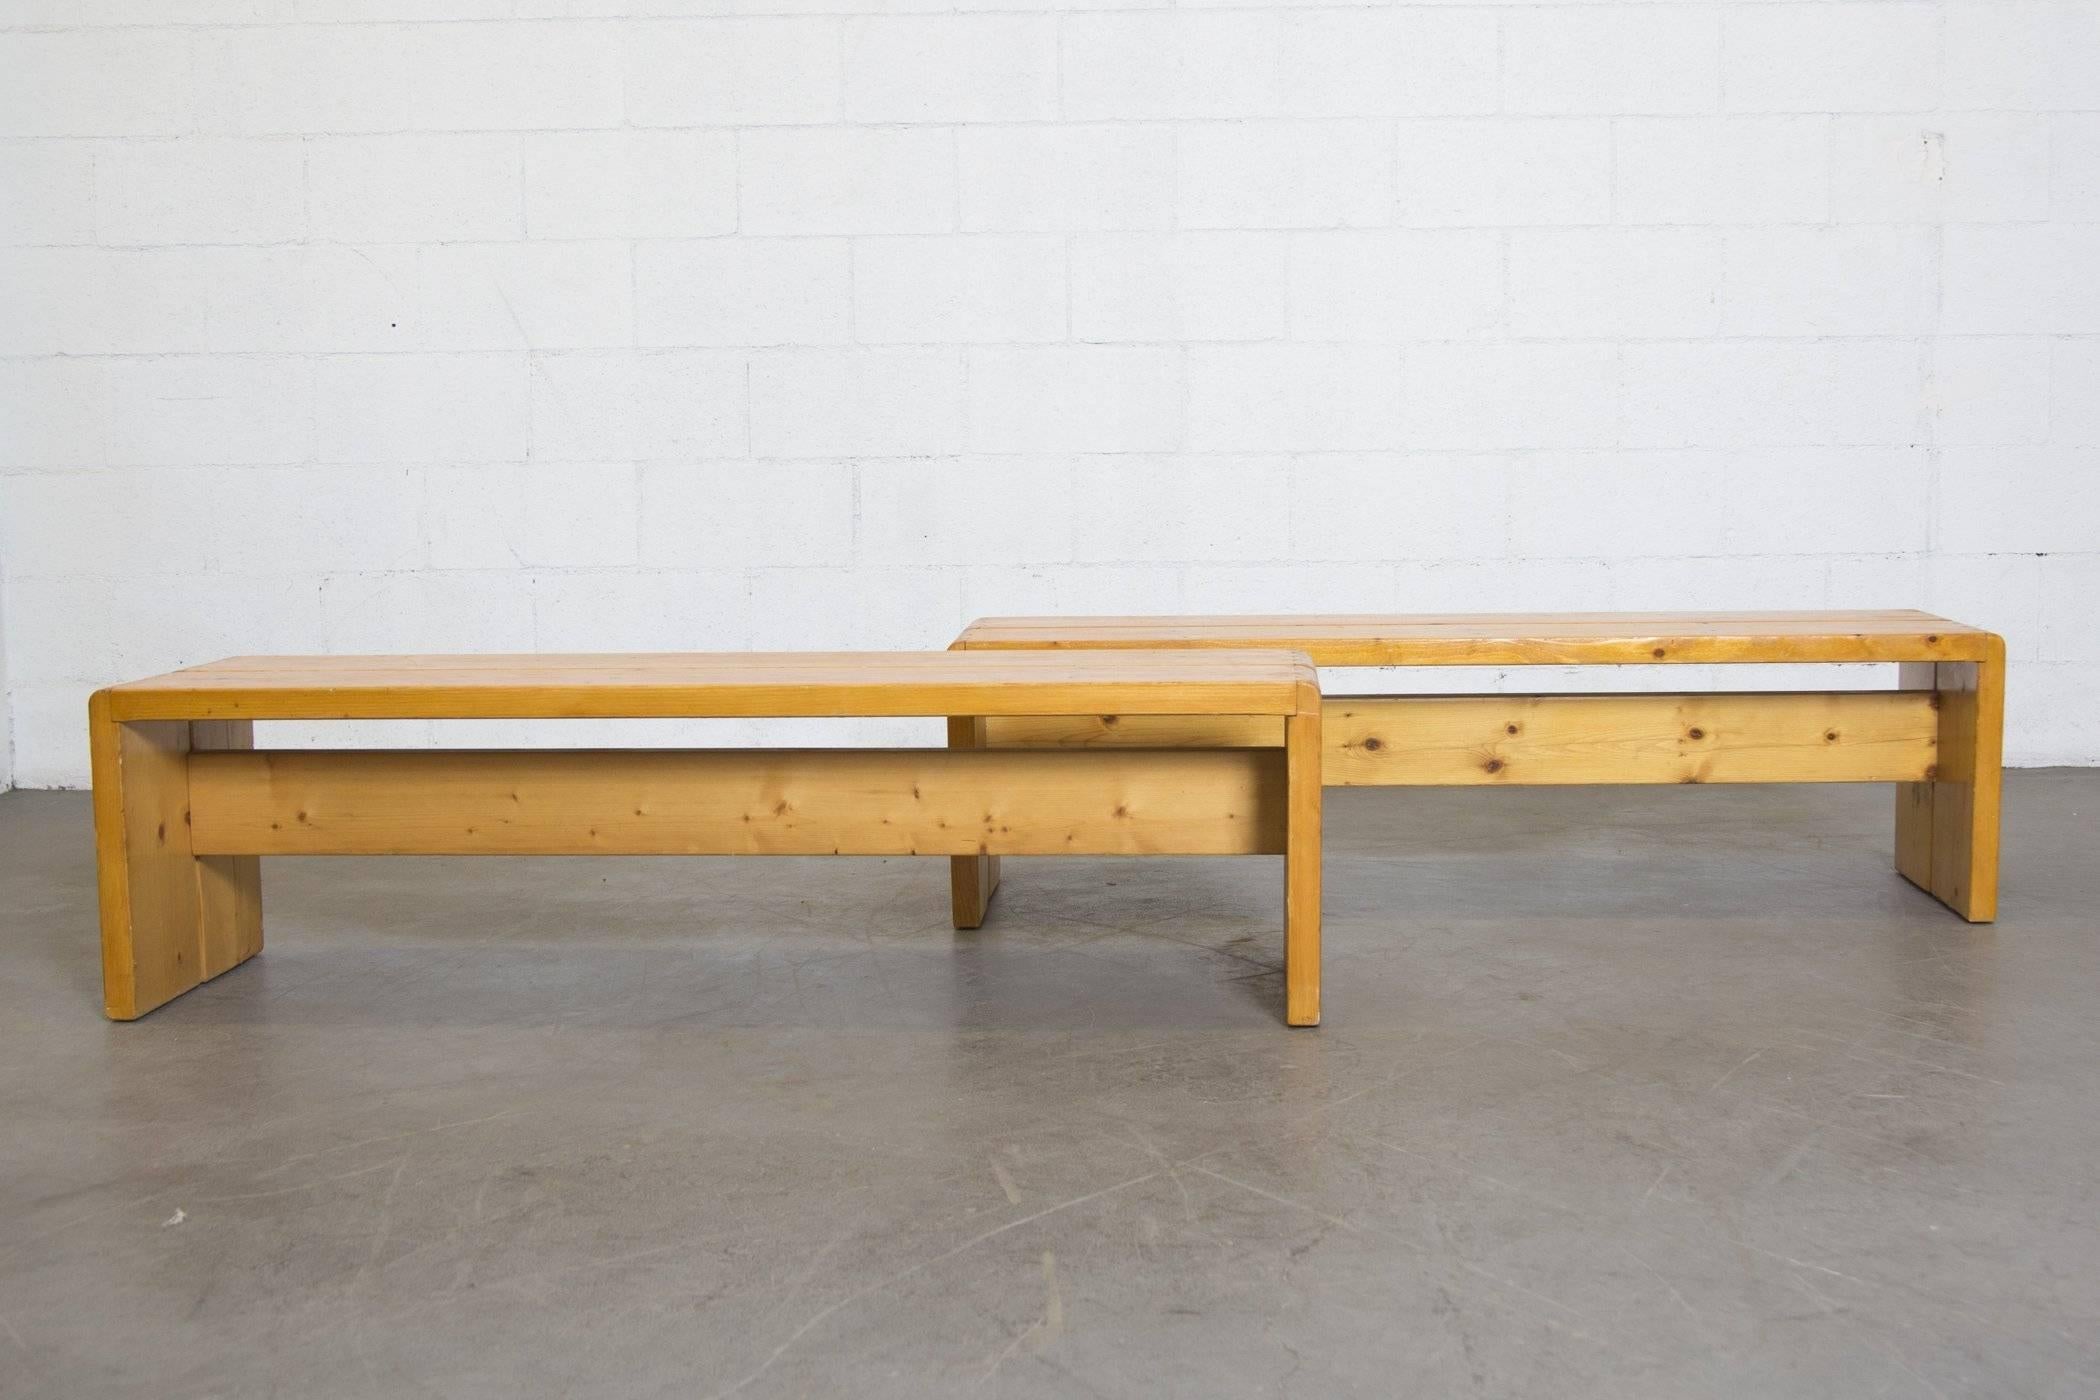 Solid pine Charlotte Perriand benches for Les Arcs ski resort in France. Set price. Good original condition with some surface wear consistent with age and use.